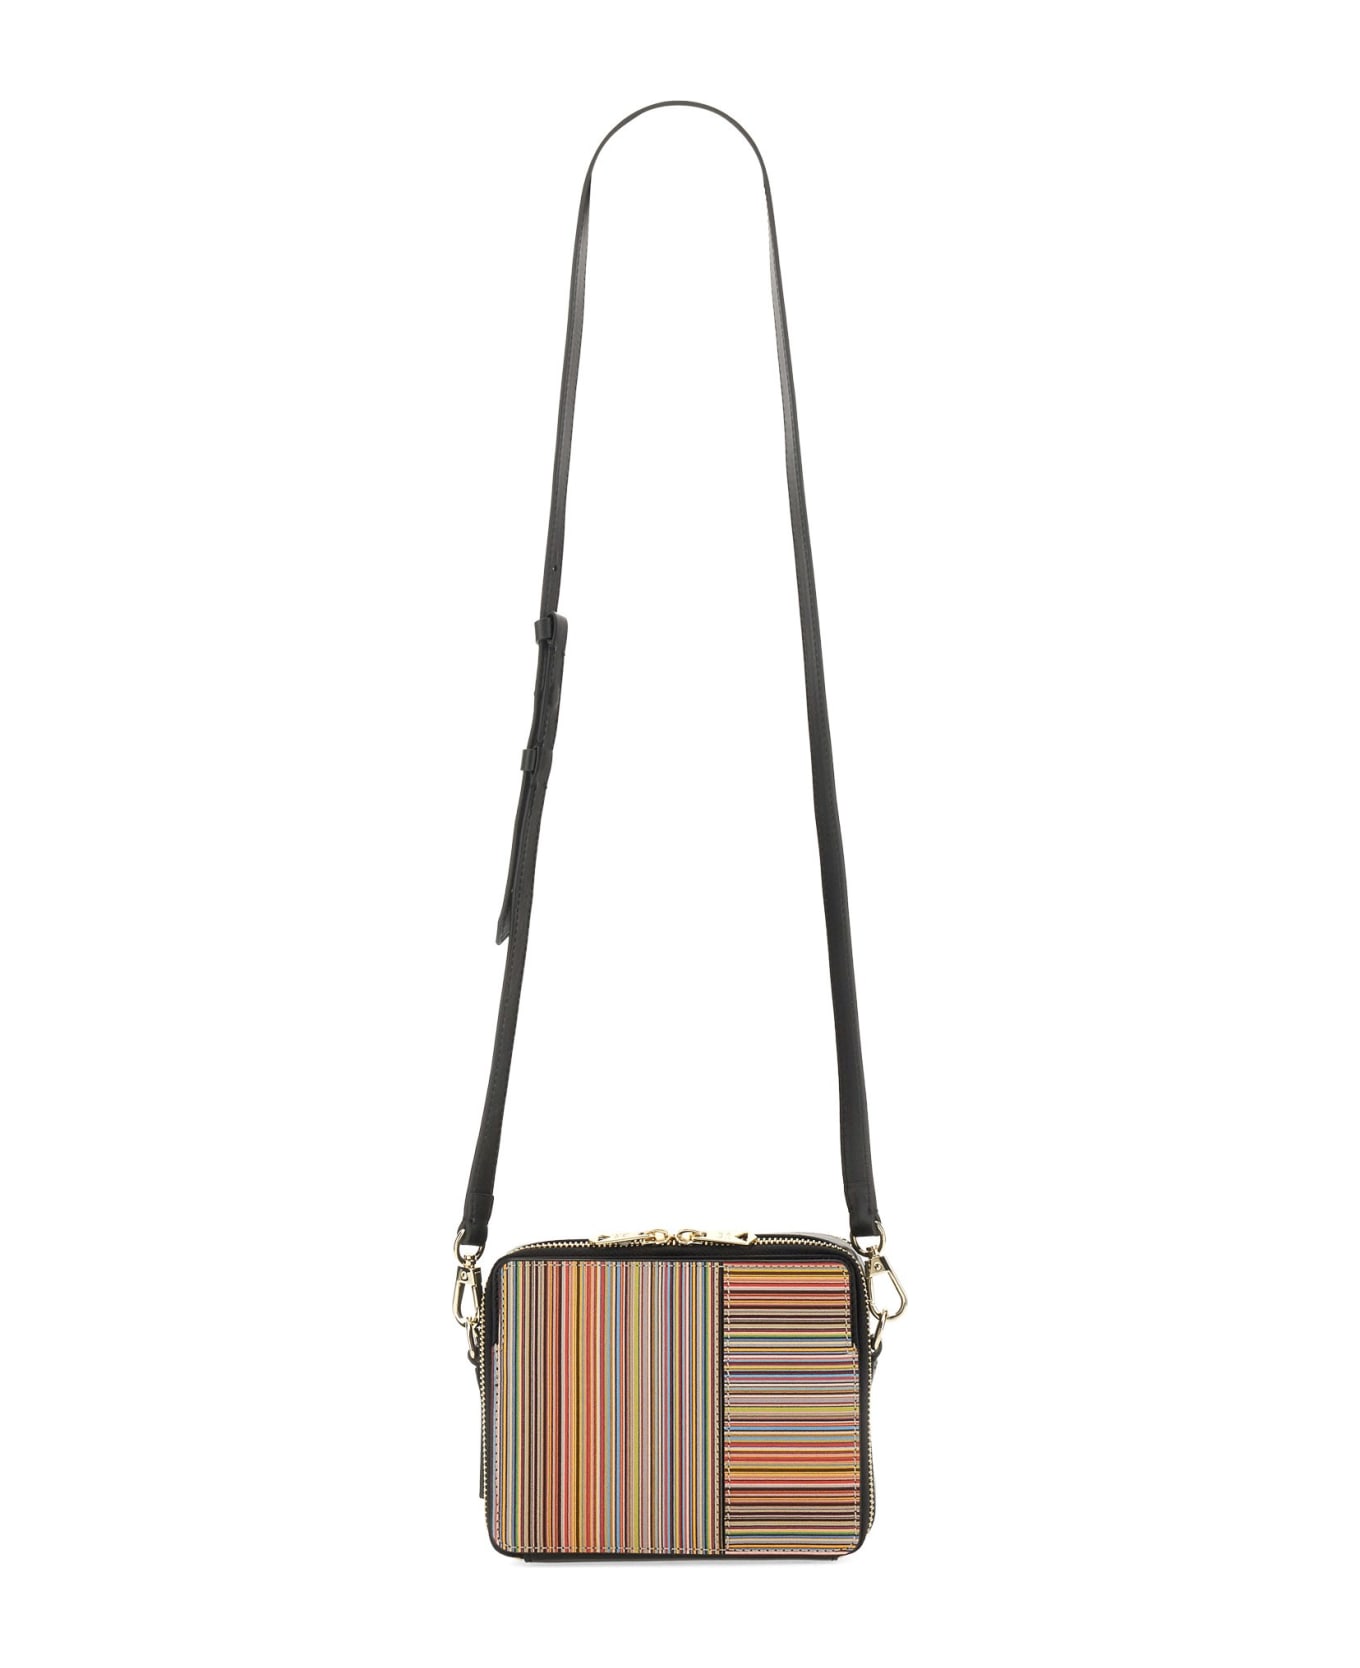 Paul Smith Bag NOW £395 - The White Dress Agency